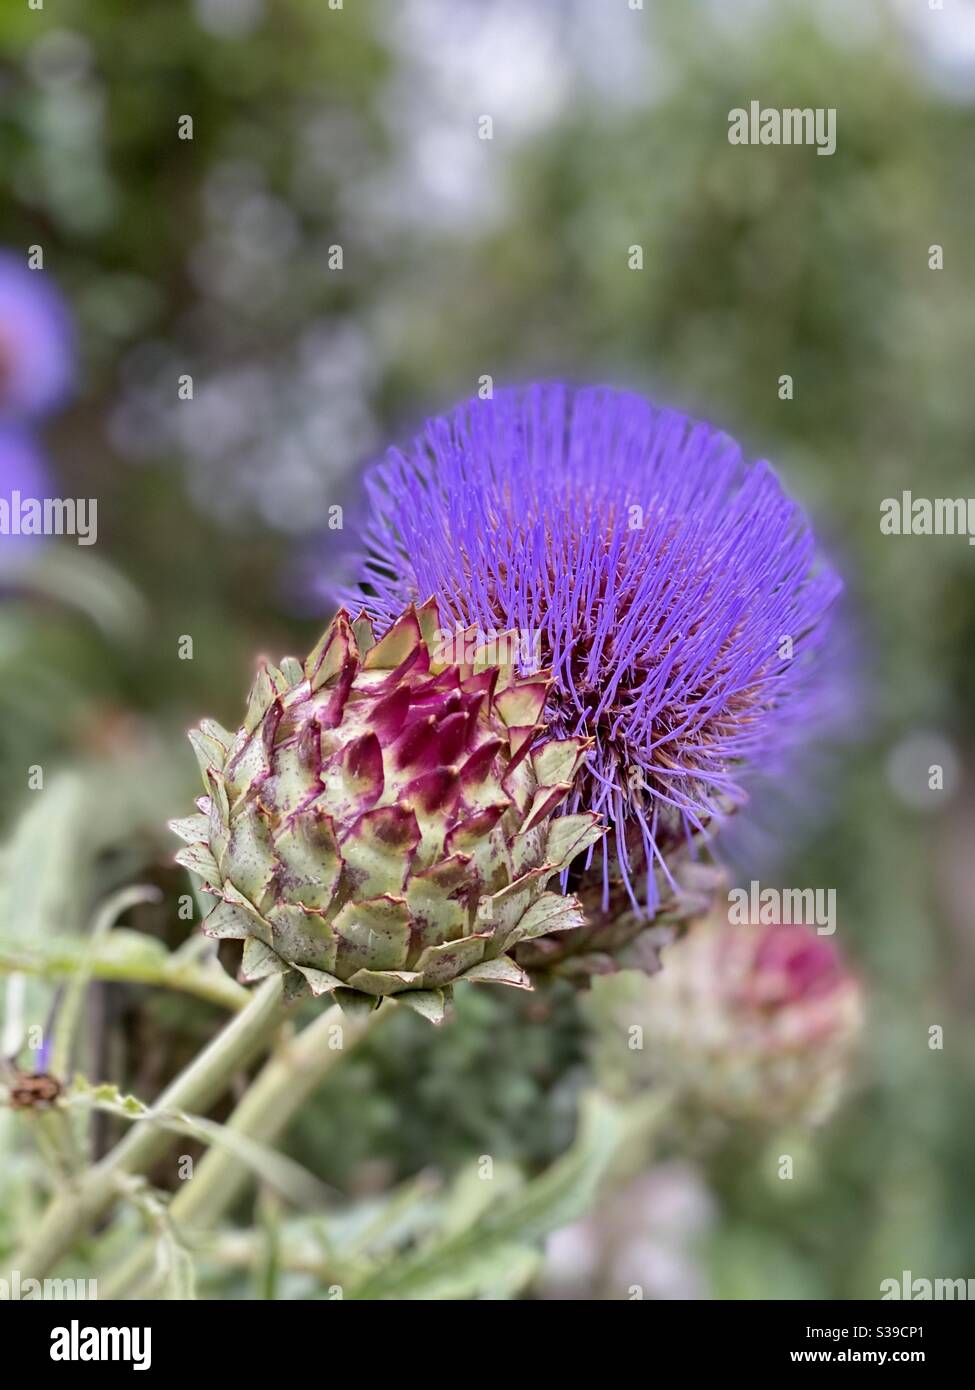 Close up of a thistle blossom with one head blooming and another blossom still closed. Symbol of defense. Stock Photo